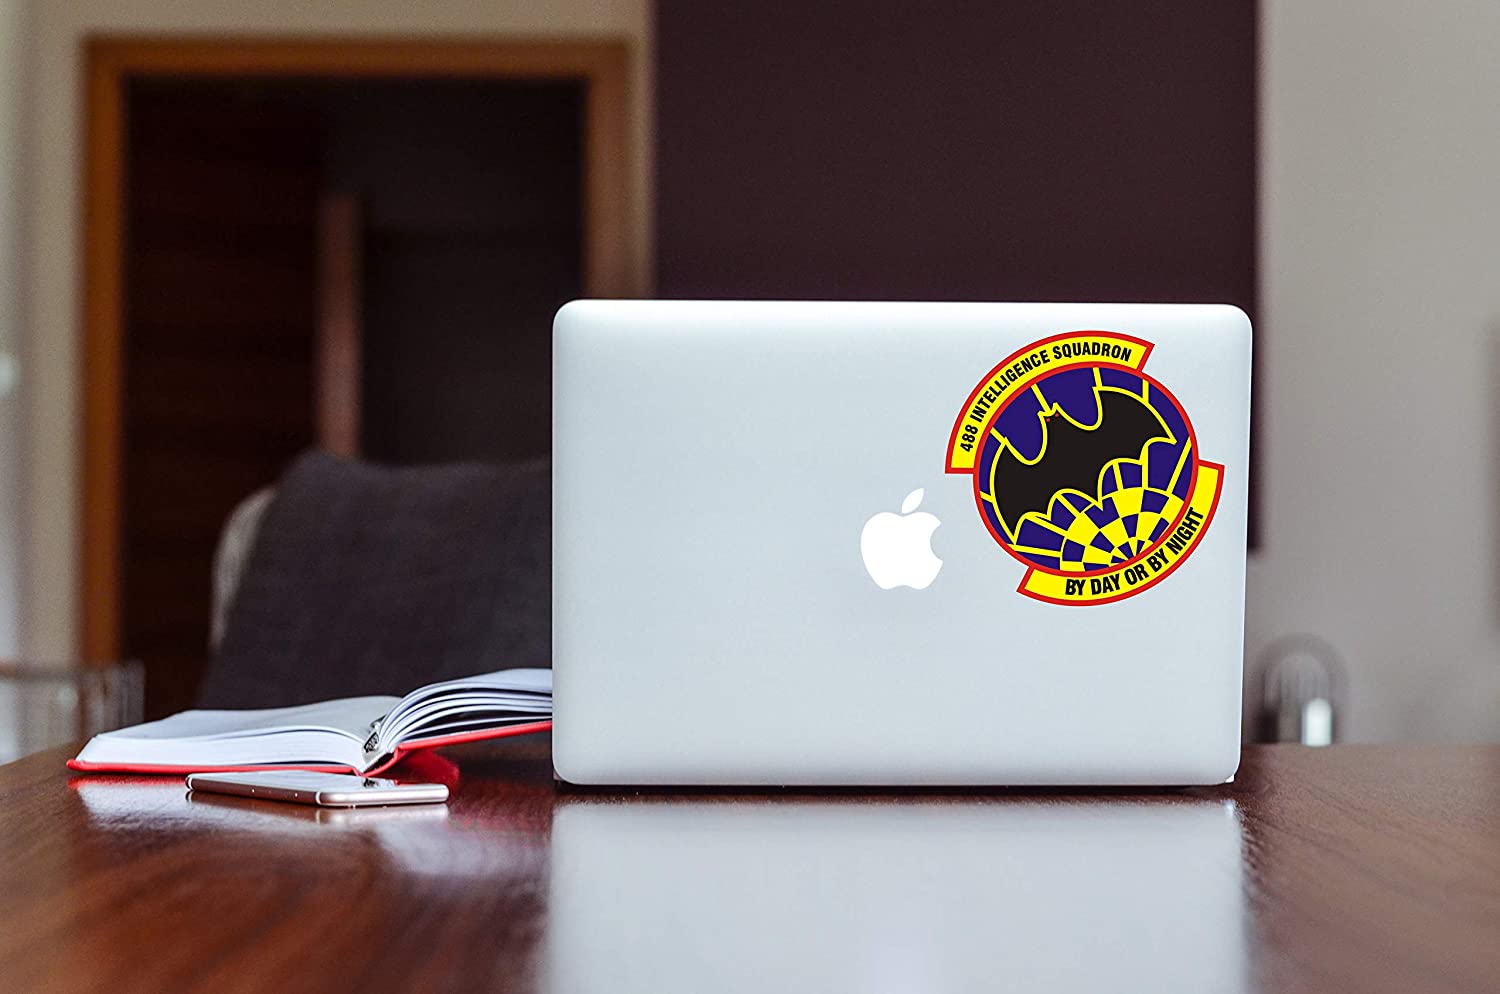 488th Intelligence Squadron - Patch Vinyl Decal - Available in Multiple Sizes